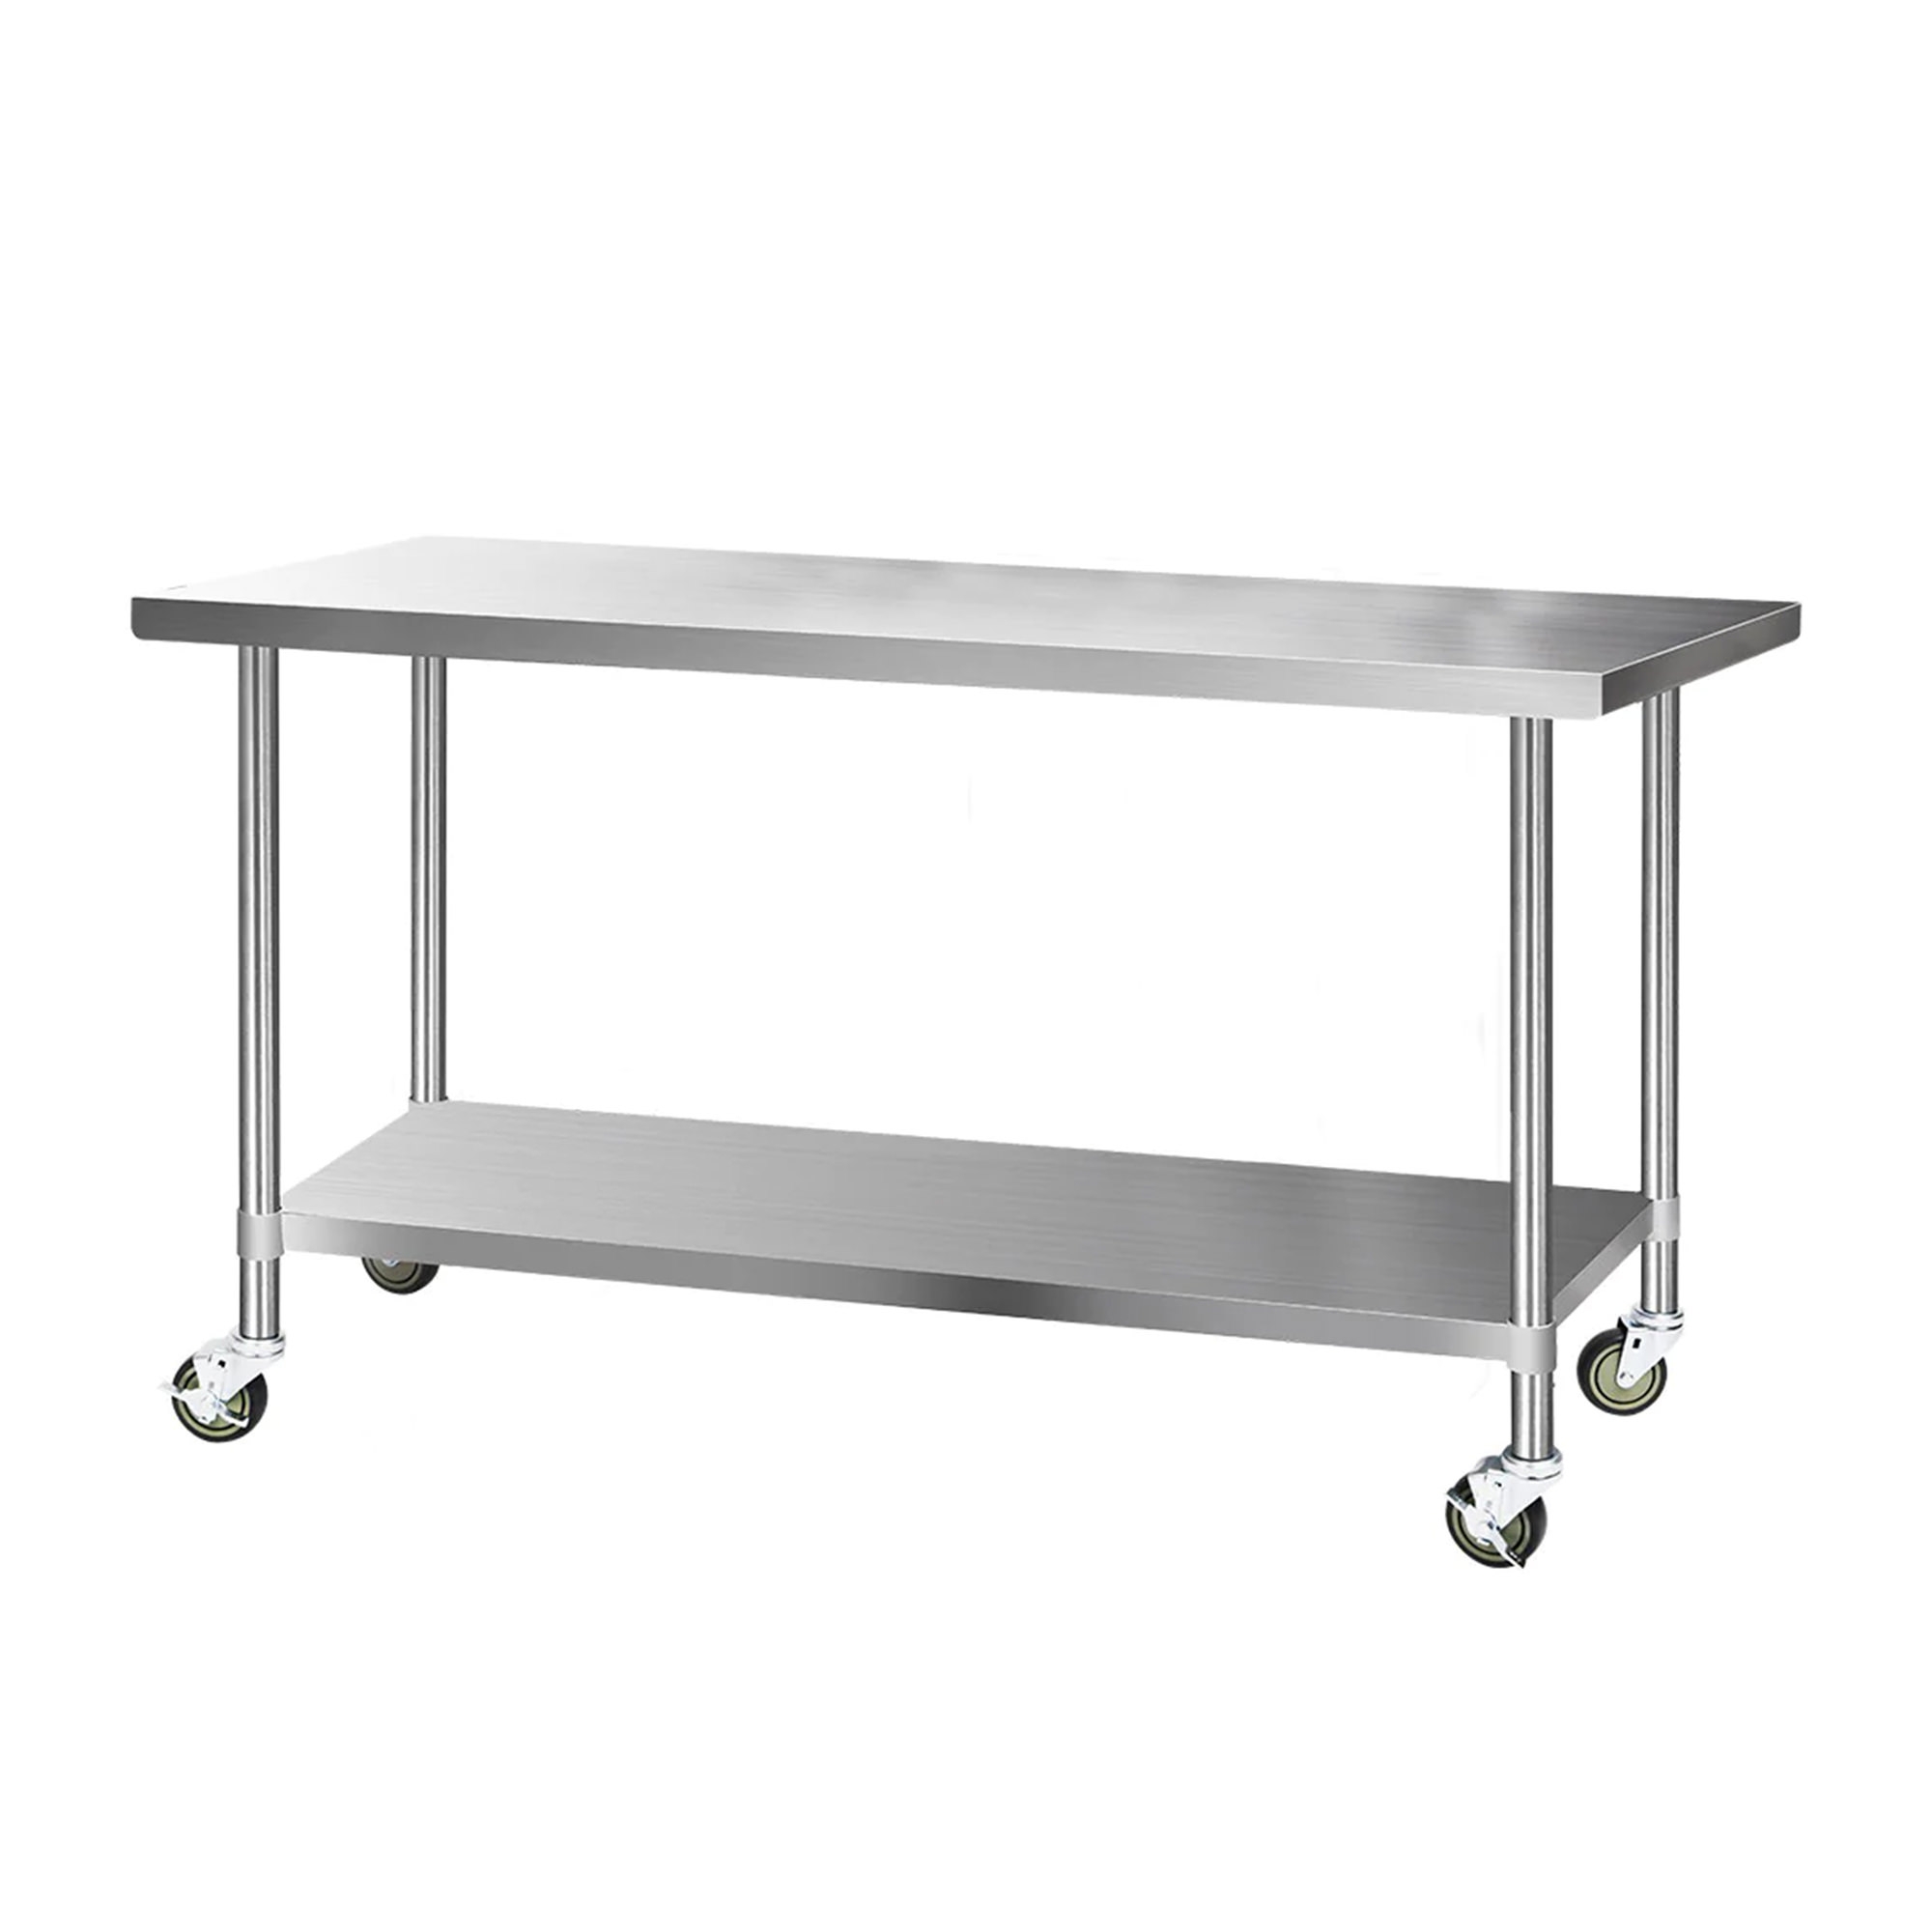 Cefito 430 Stainless Steel Kitchen Bench with Wheels 182.9x76cm Image 2